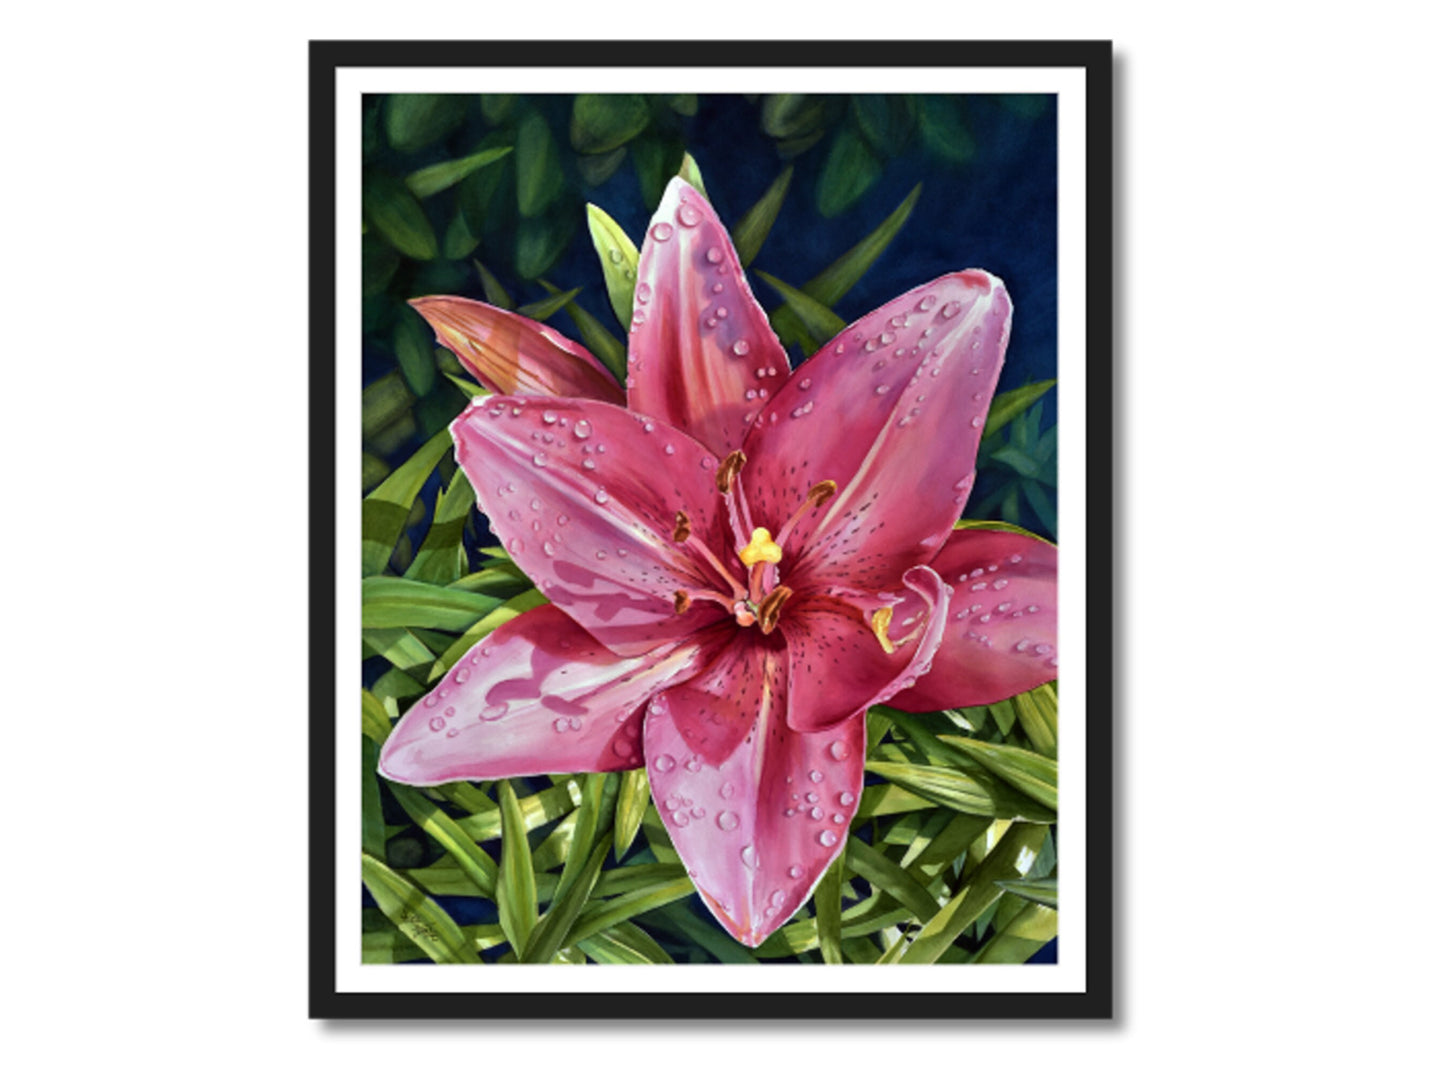 Pink, Lily, Canvas Print, Watercolor Painting, Above Bed Decor, Lily Wall Art, Large Wall Art